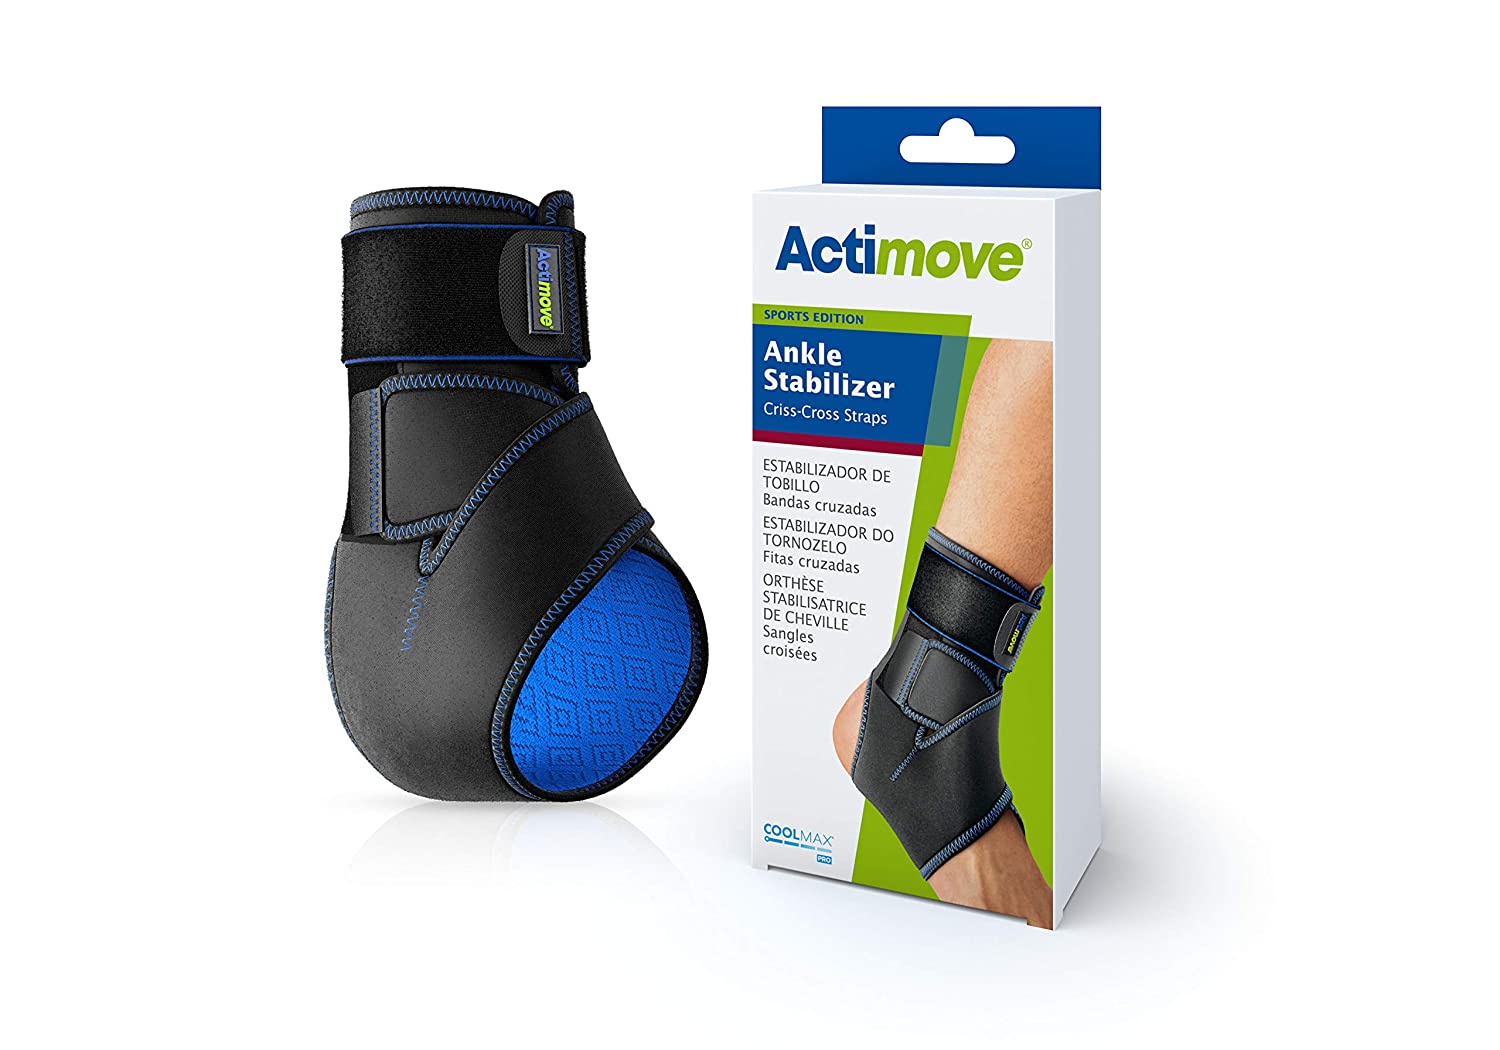 For treatment of soft tissue ankle injury as well as sprain and strains, material adds the soothing warmth of neoprene with a soft terry-cloth lining.